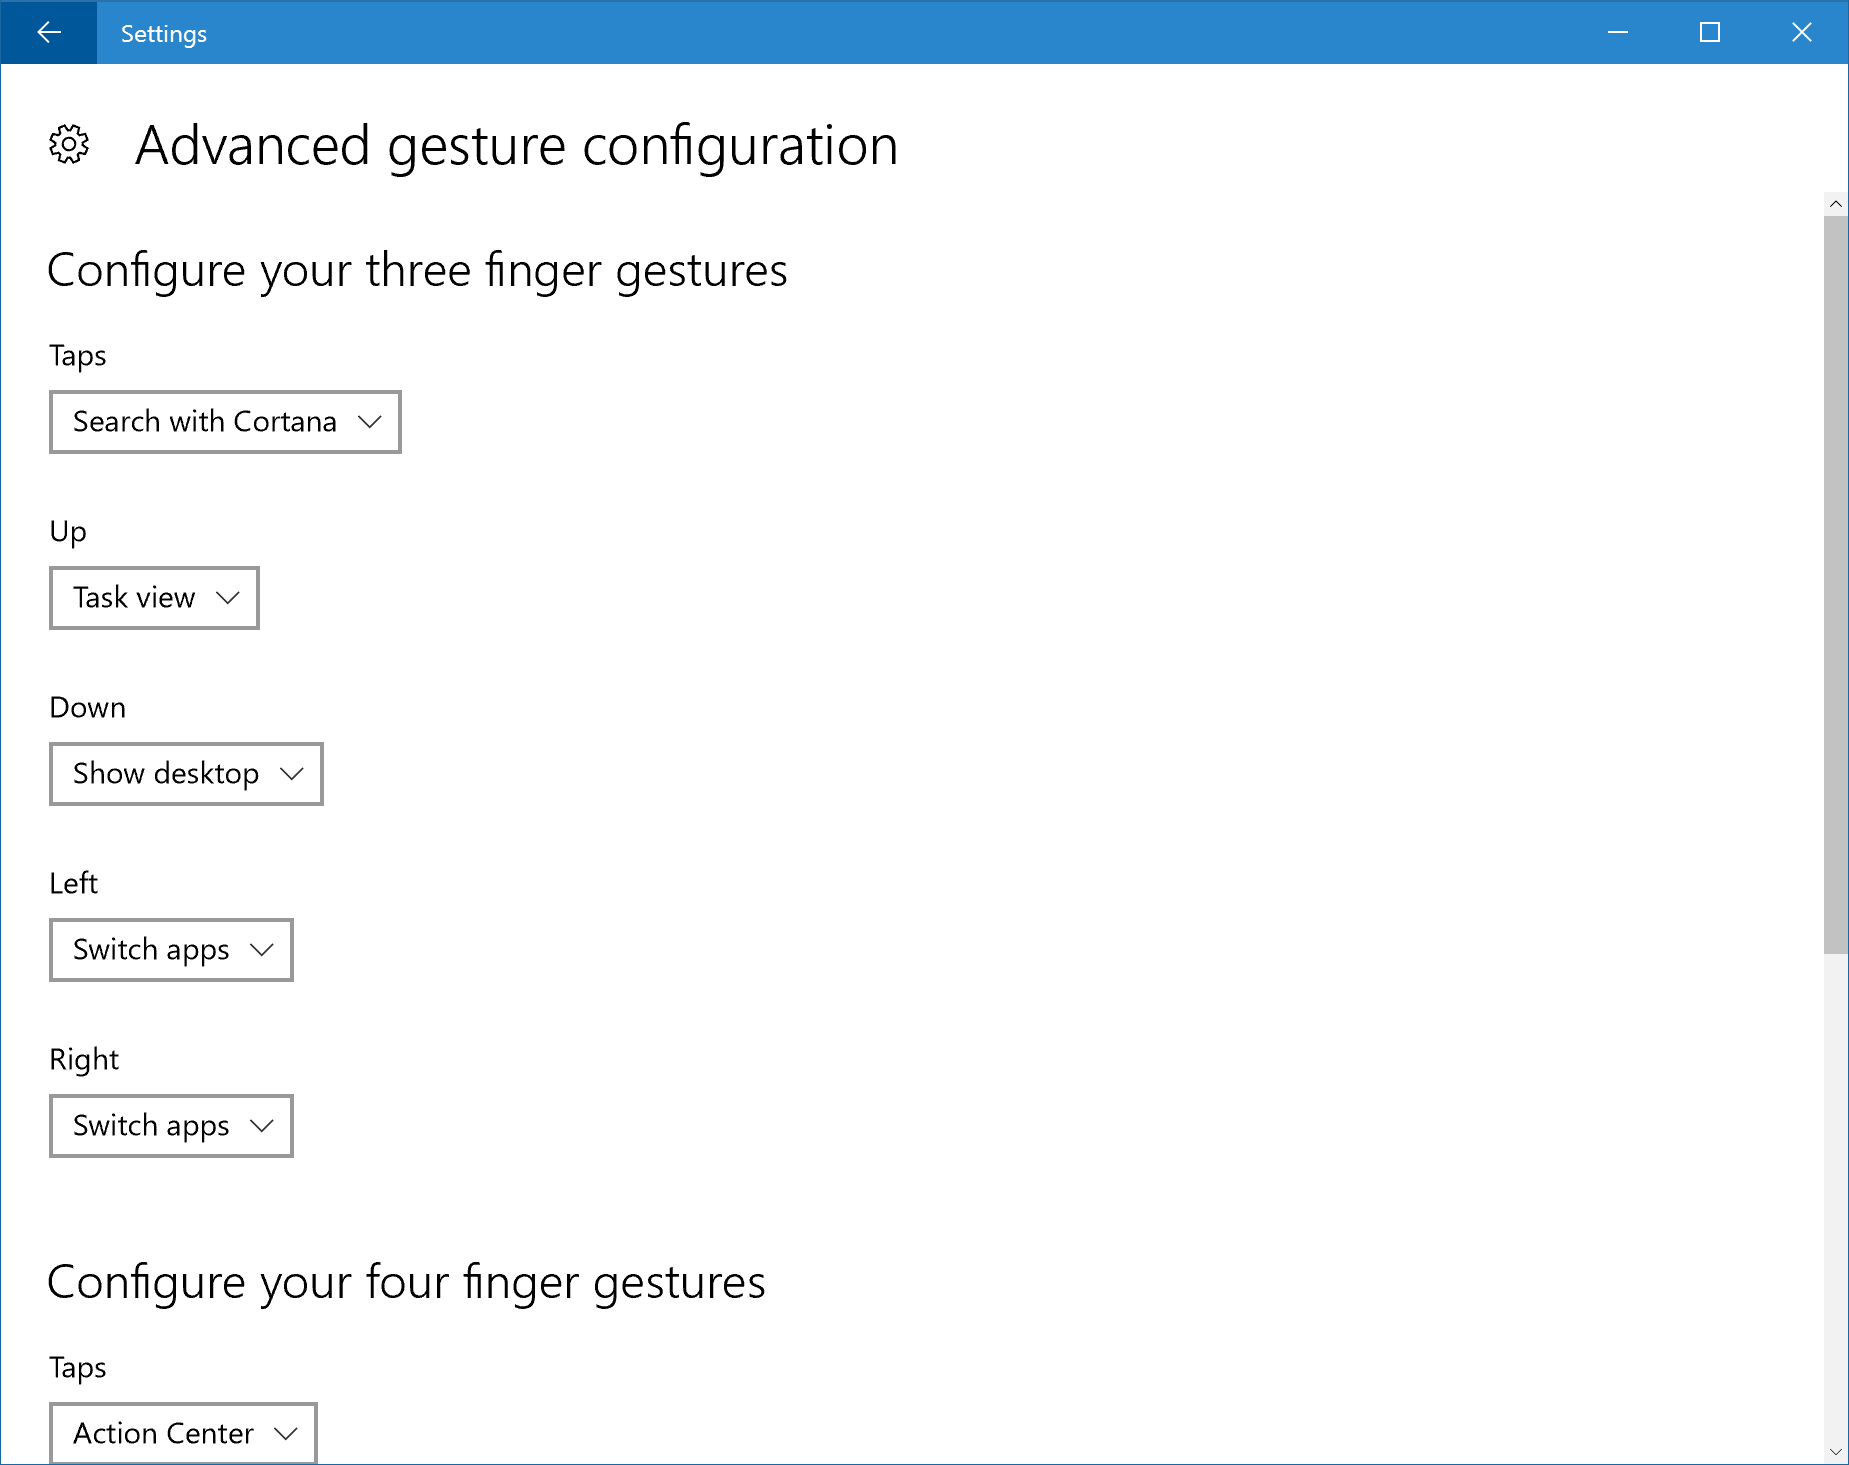 Advanced Gesture Configuration settings page